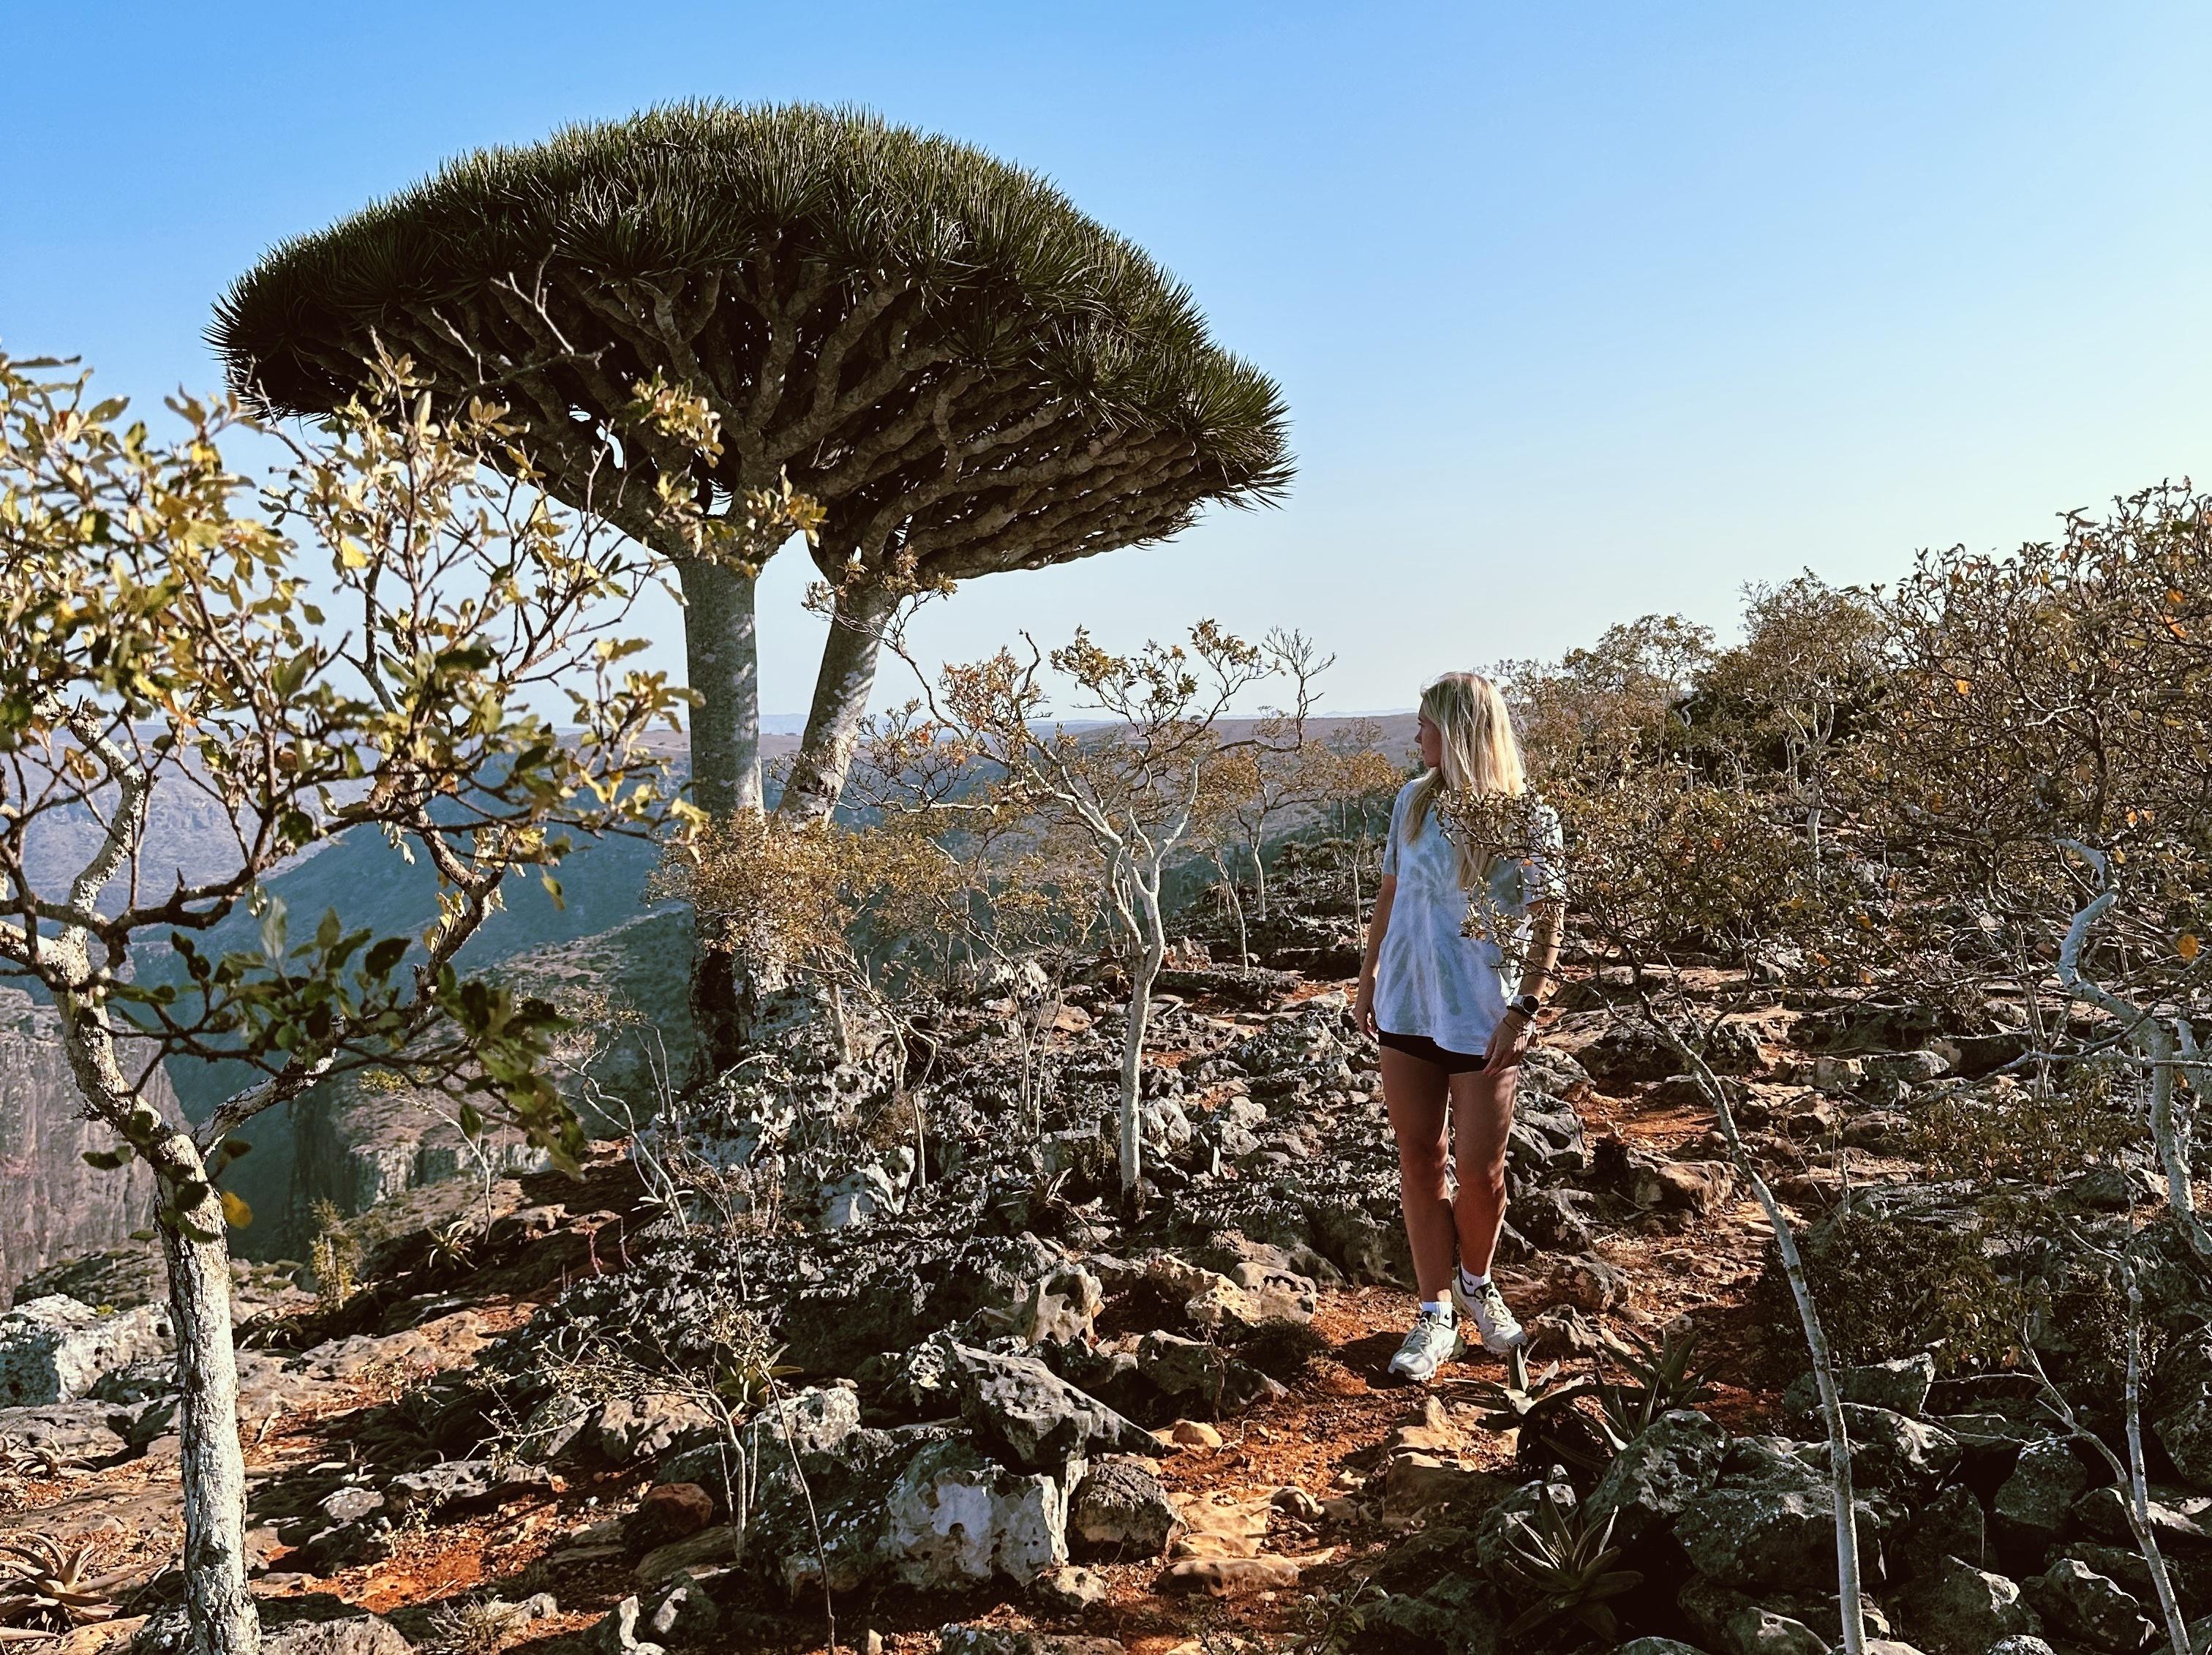 Socotra Truly a once in a lifetime adventure, and I'm excited